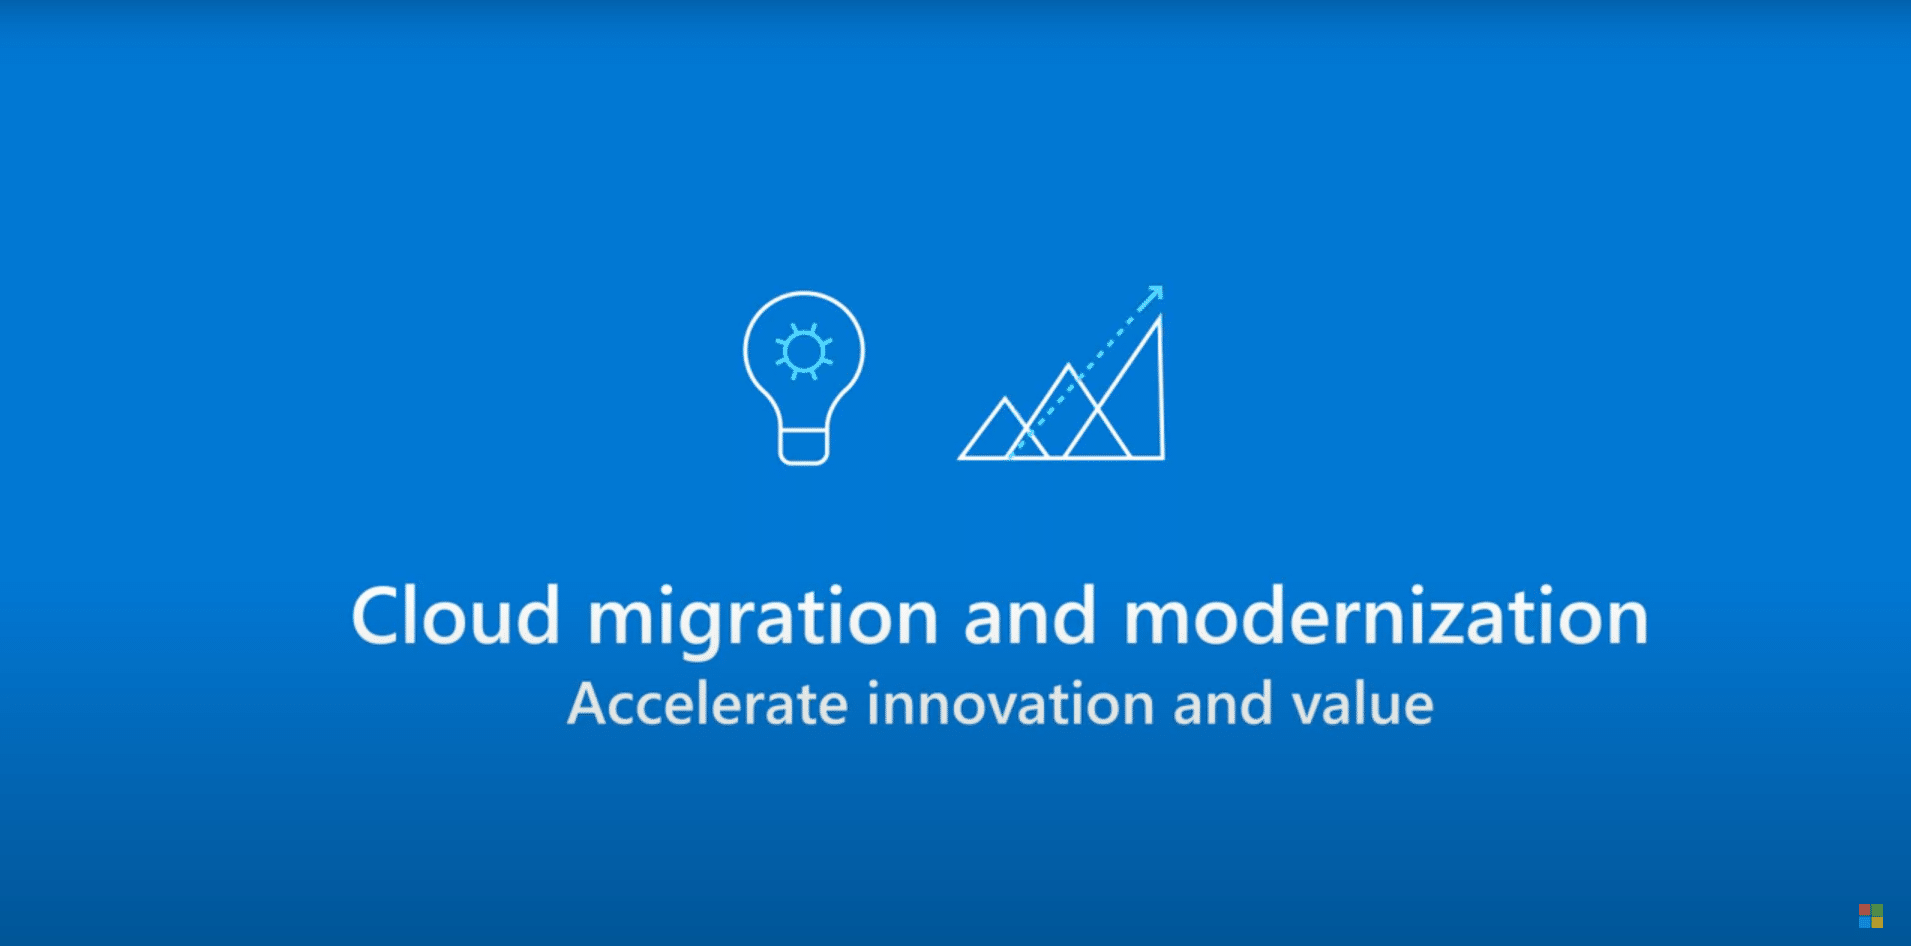 Transform and modernize your legacy apps to run in the Cloud